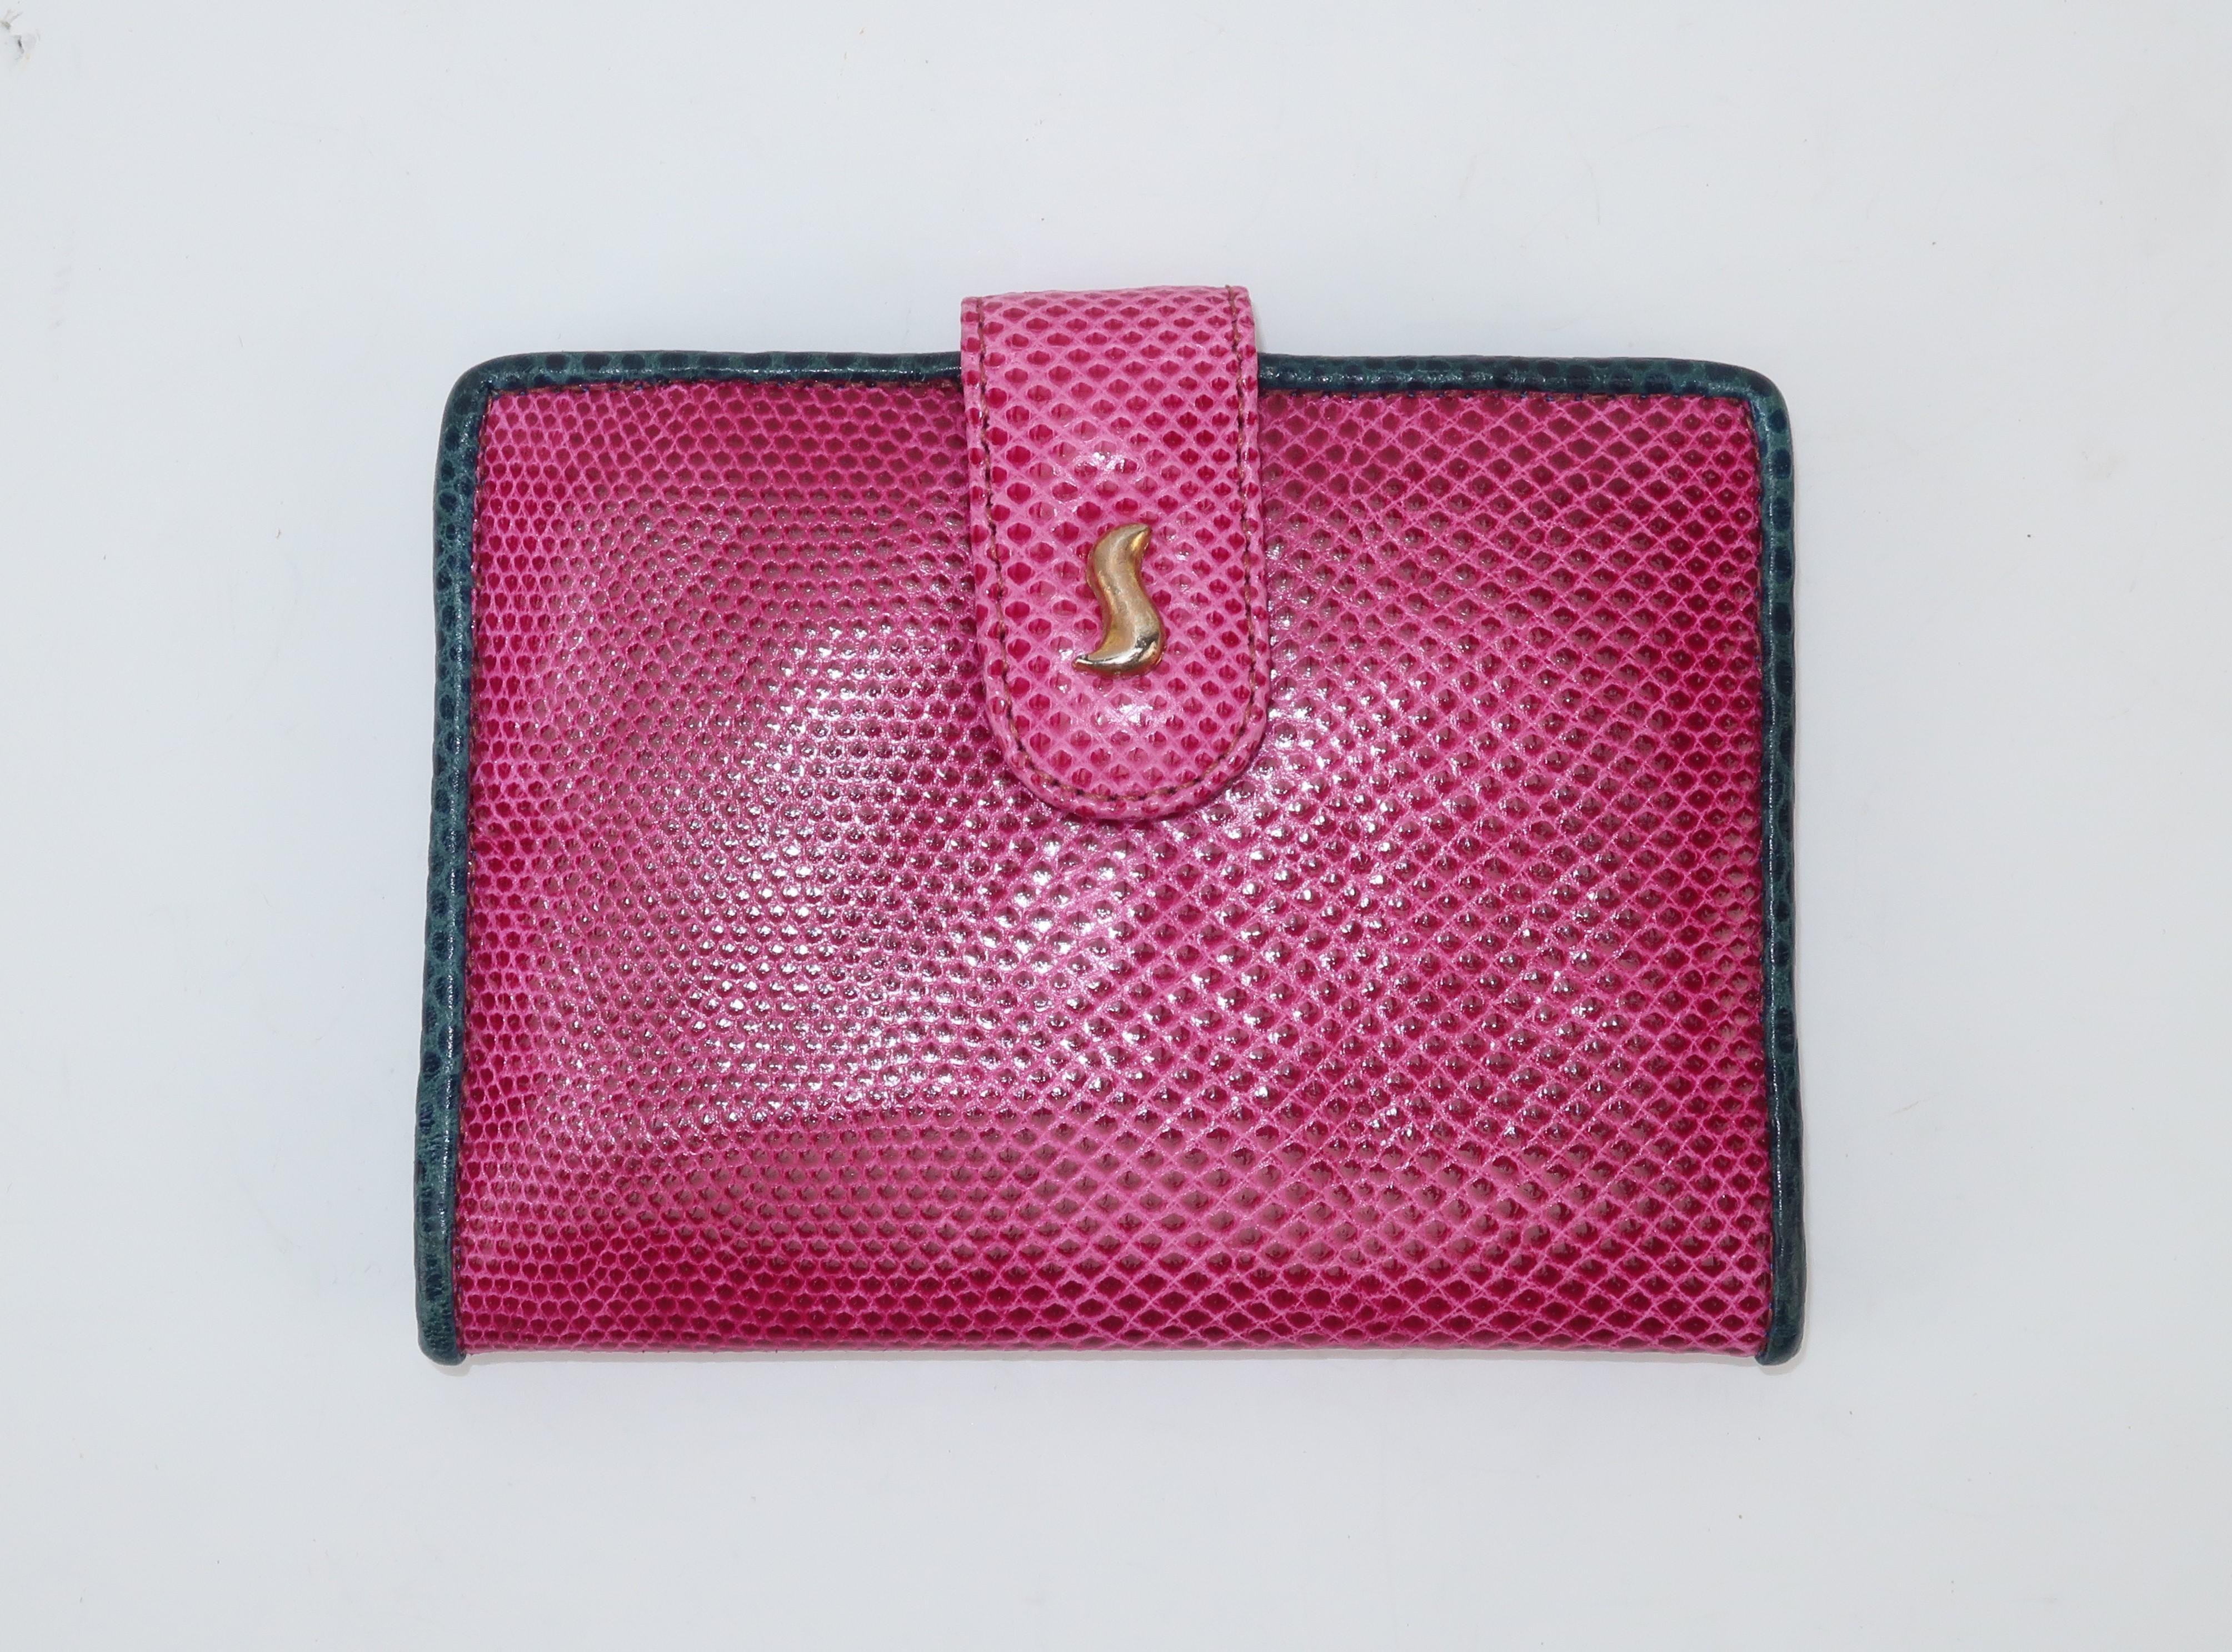 This vintage card case is as unique in style as the handbags made by Sharif, a leather goods company specializing in exotic materials.  The practical case also serves a colorful purpose with a contrasting hot pink lizard skin trimmed in blue which